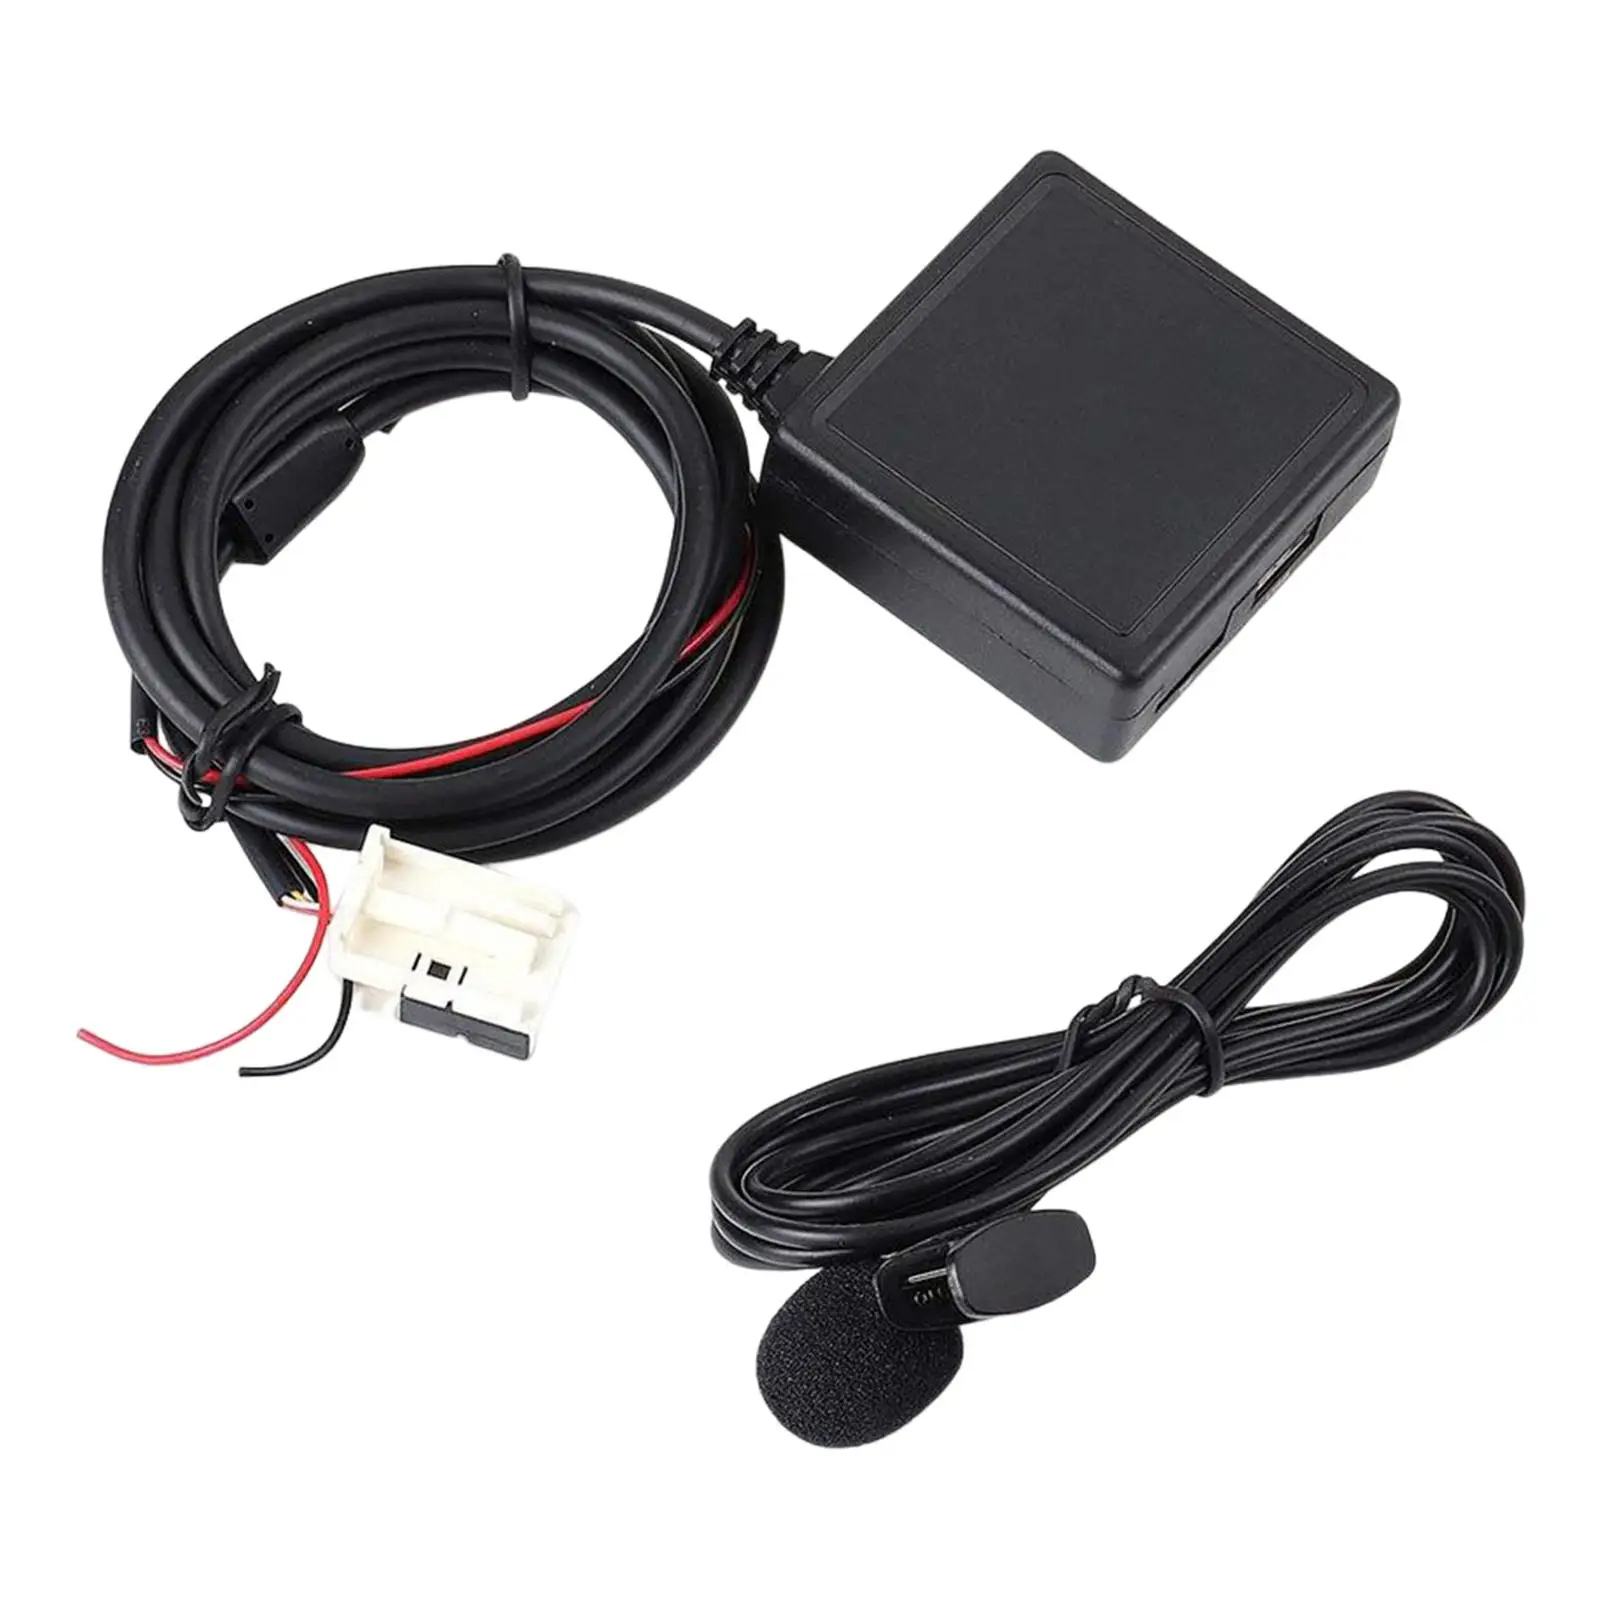 Auxiliary Audio Converter Media Interface Module Plug and play AUX Cable Adapter for E91